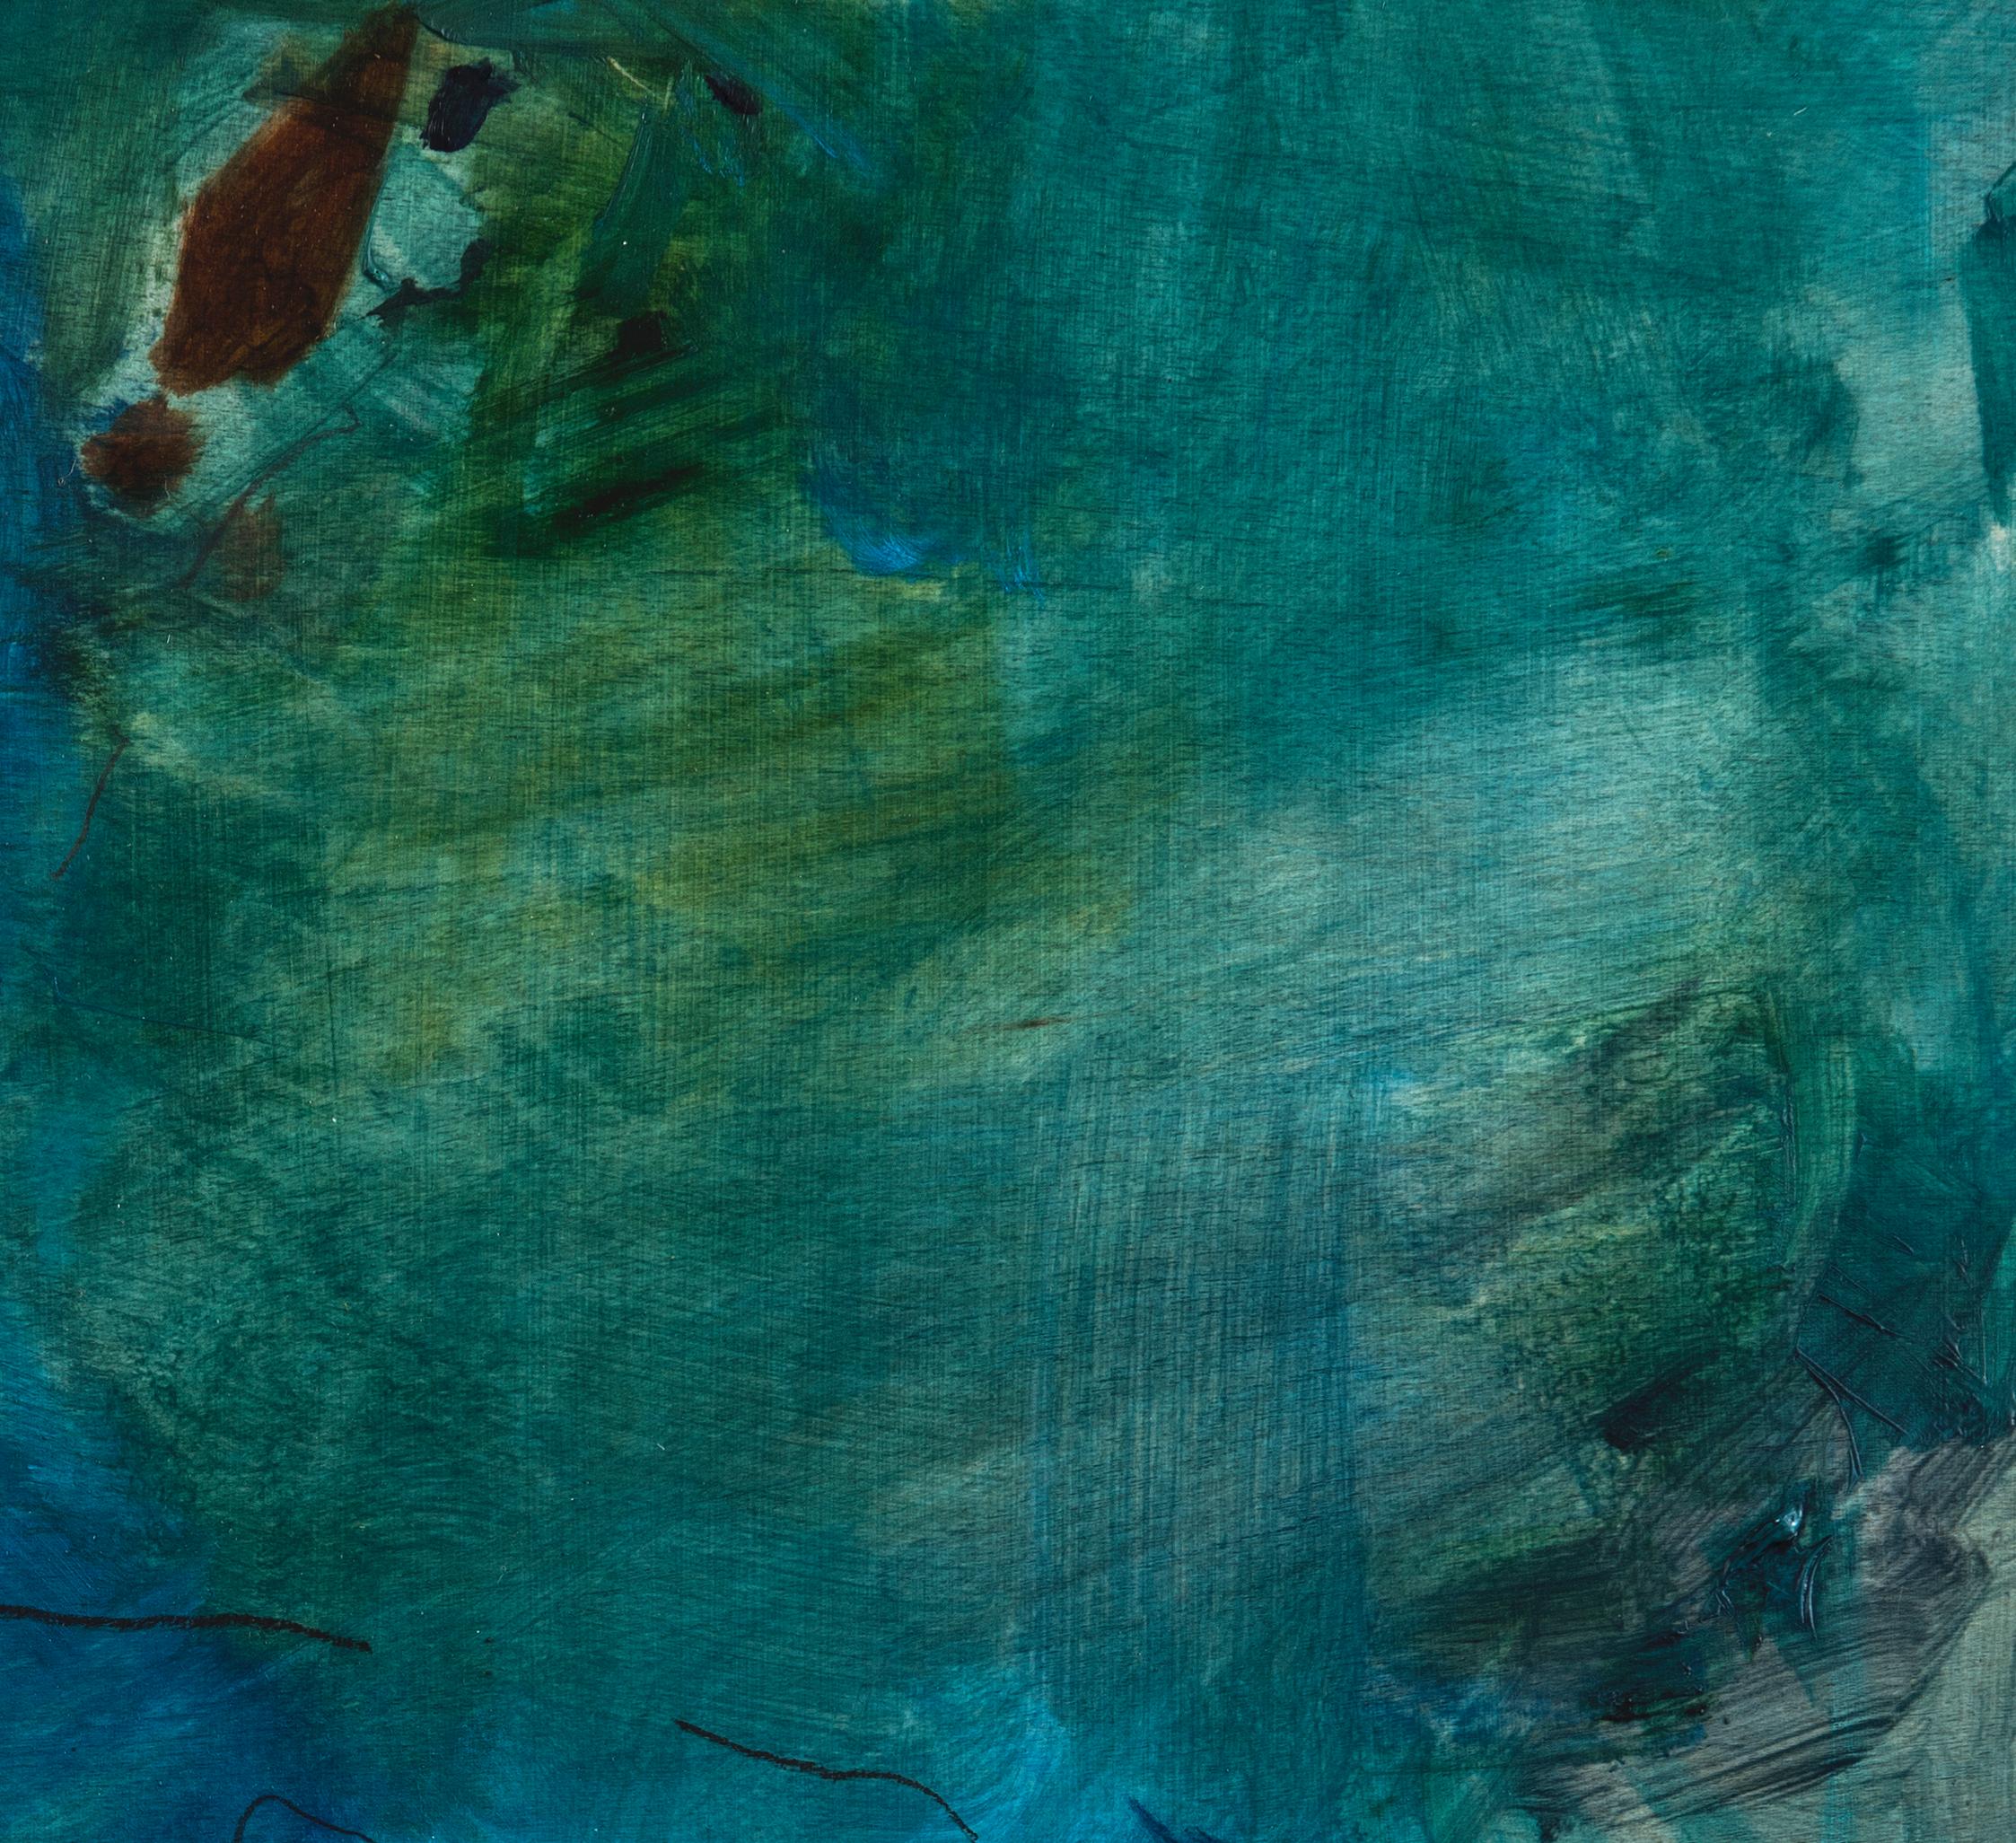 Fragment 3: Impressionist painting w/ Persian / Islamic collage, blue & green - Abstract Mixed Media Art by Nazanin Moghbeli